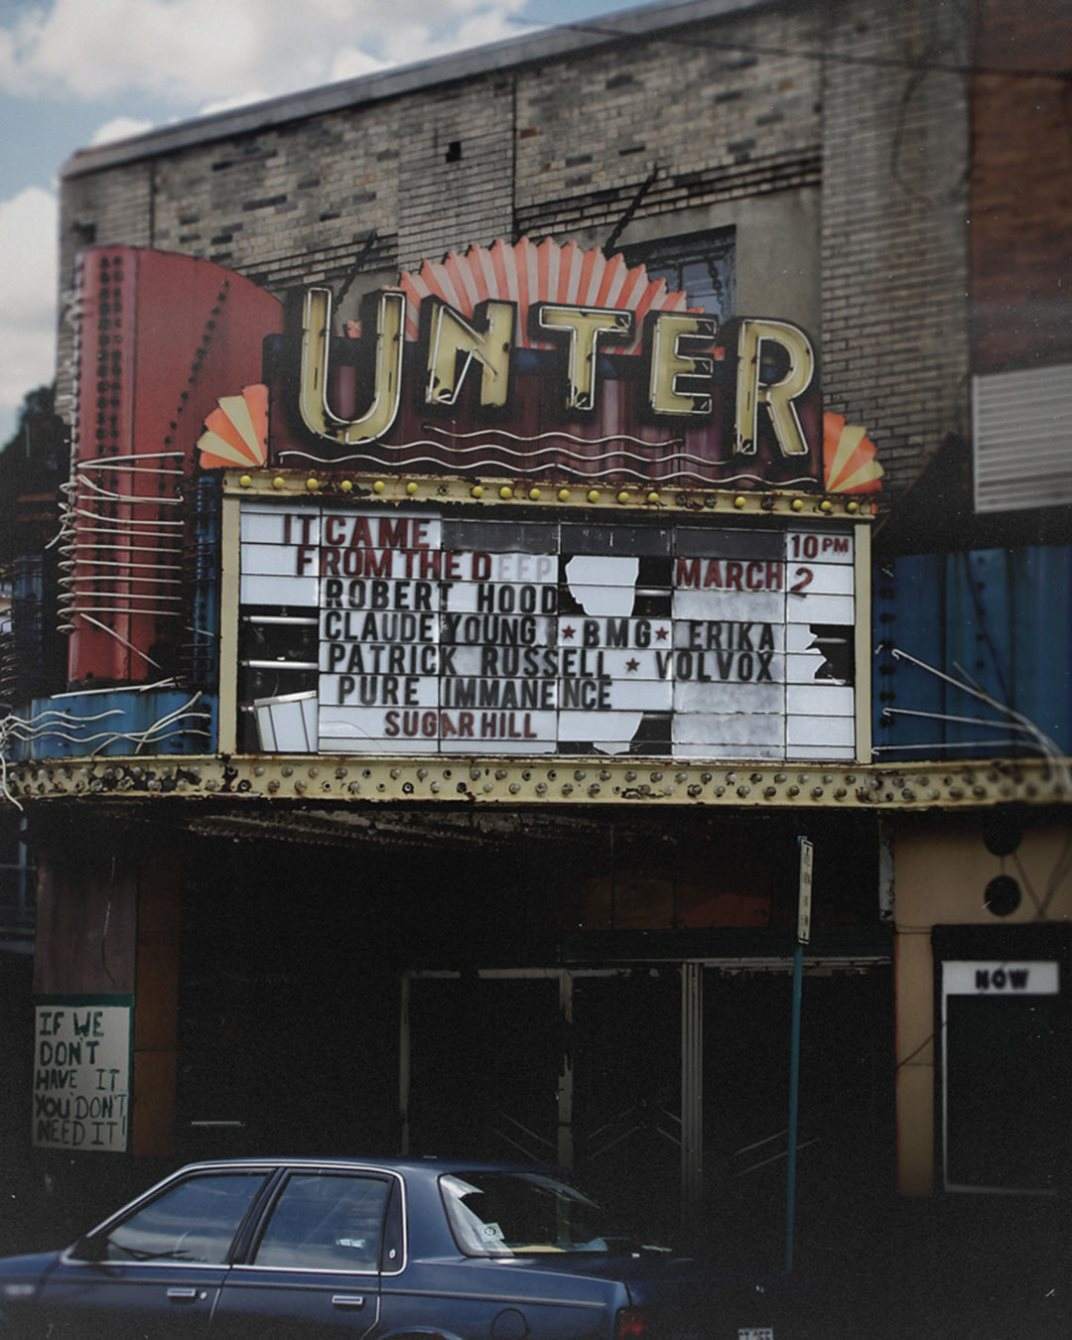 Unter: It Came From The D at Sugar Hill Disco, New York